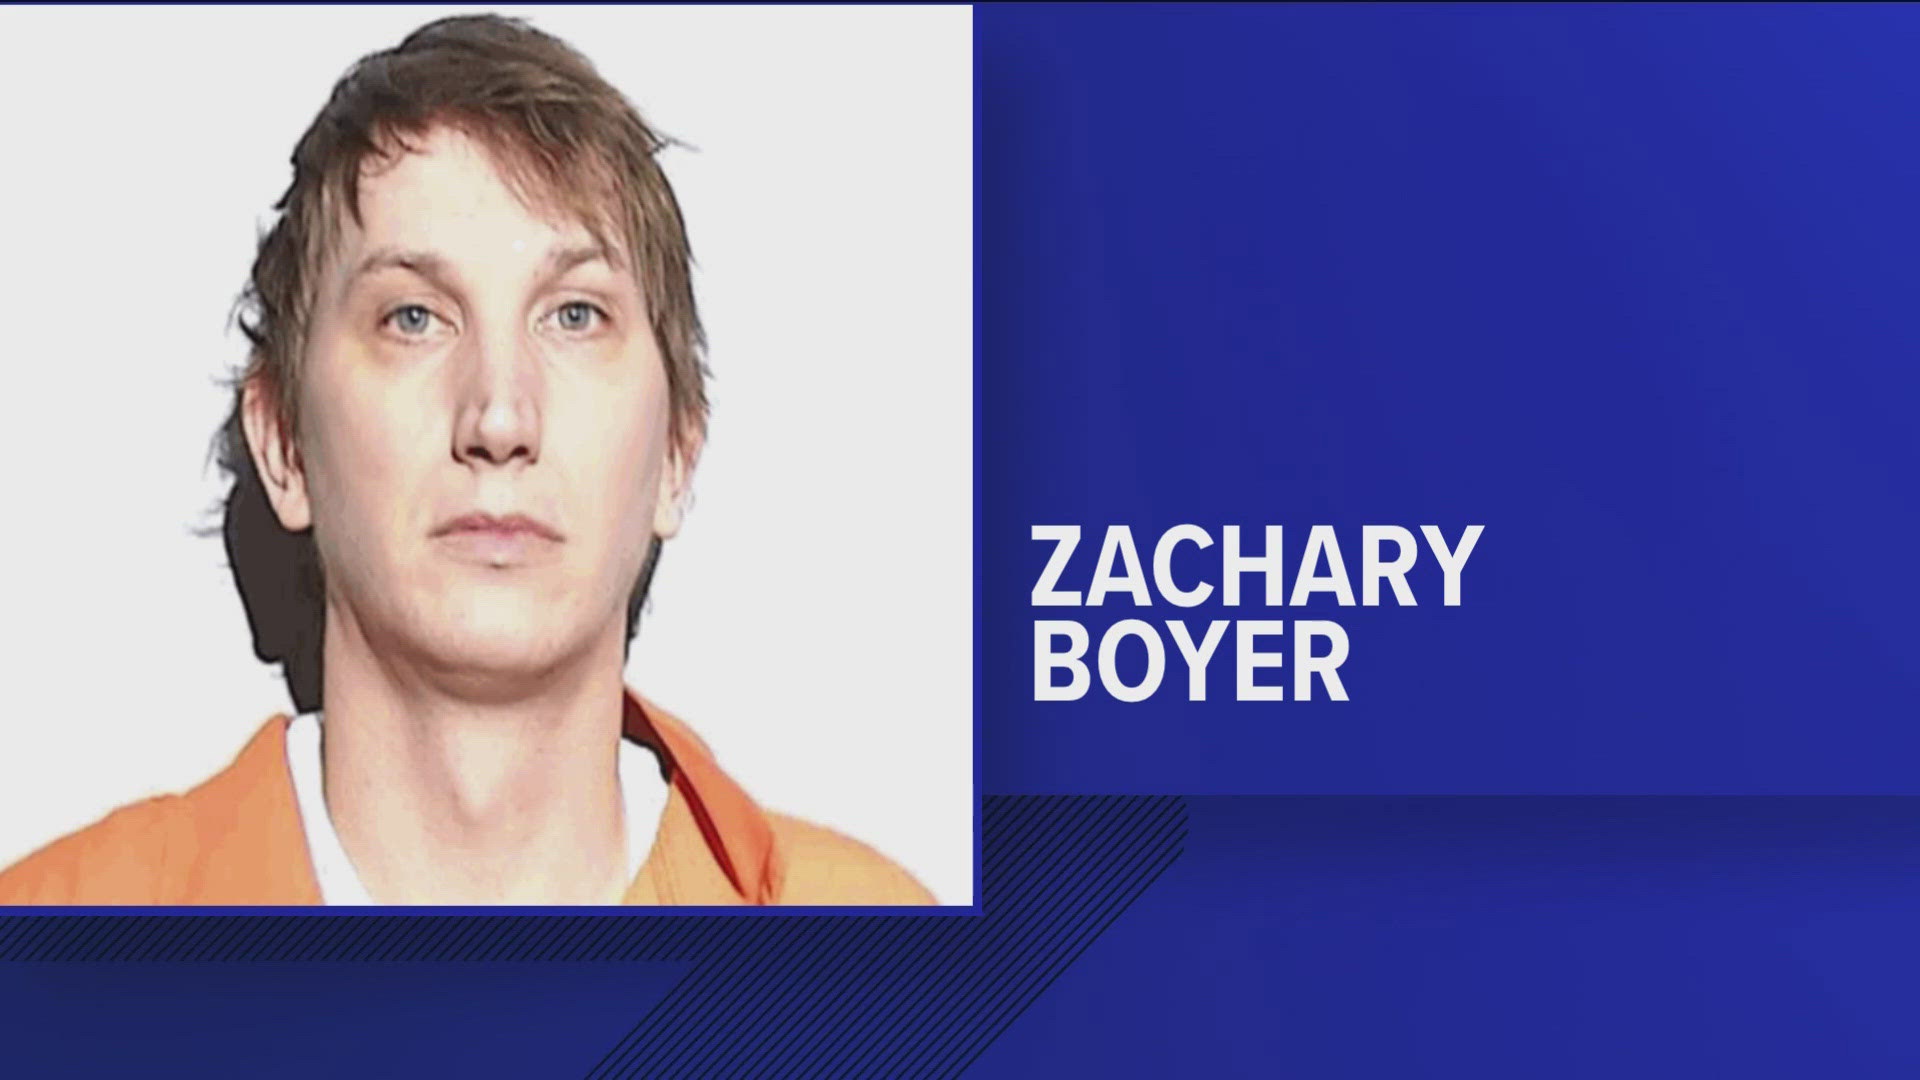 Zachary Boyer was convicted of involuntary manslaughter in the death of 76-year-old John Meeker at Side Cut Metropark in November of last year.